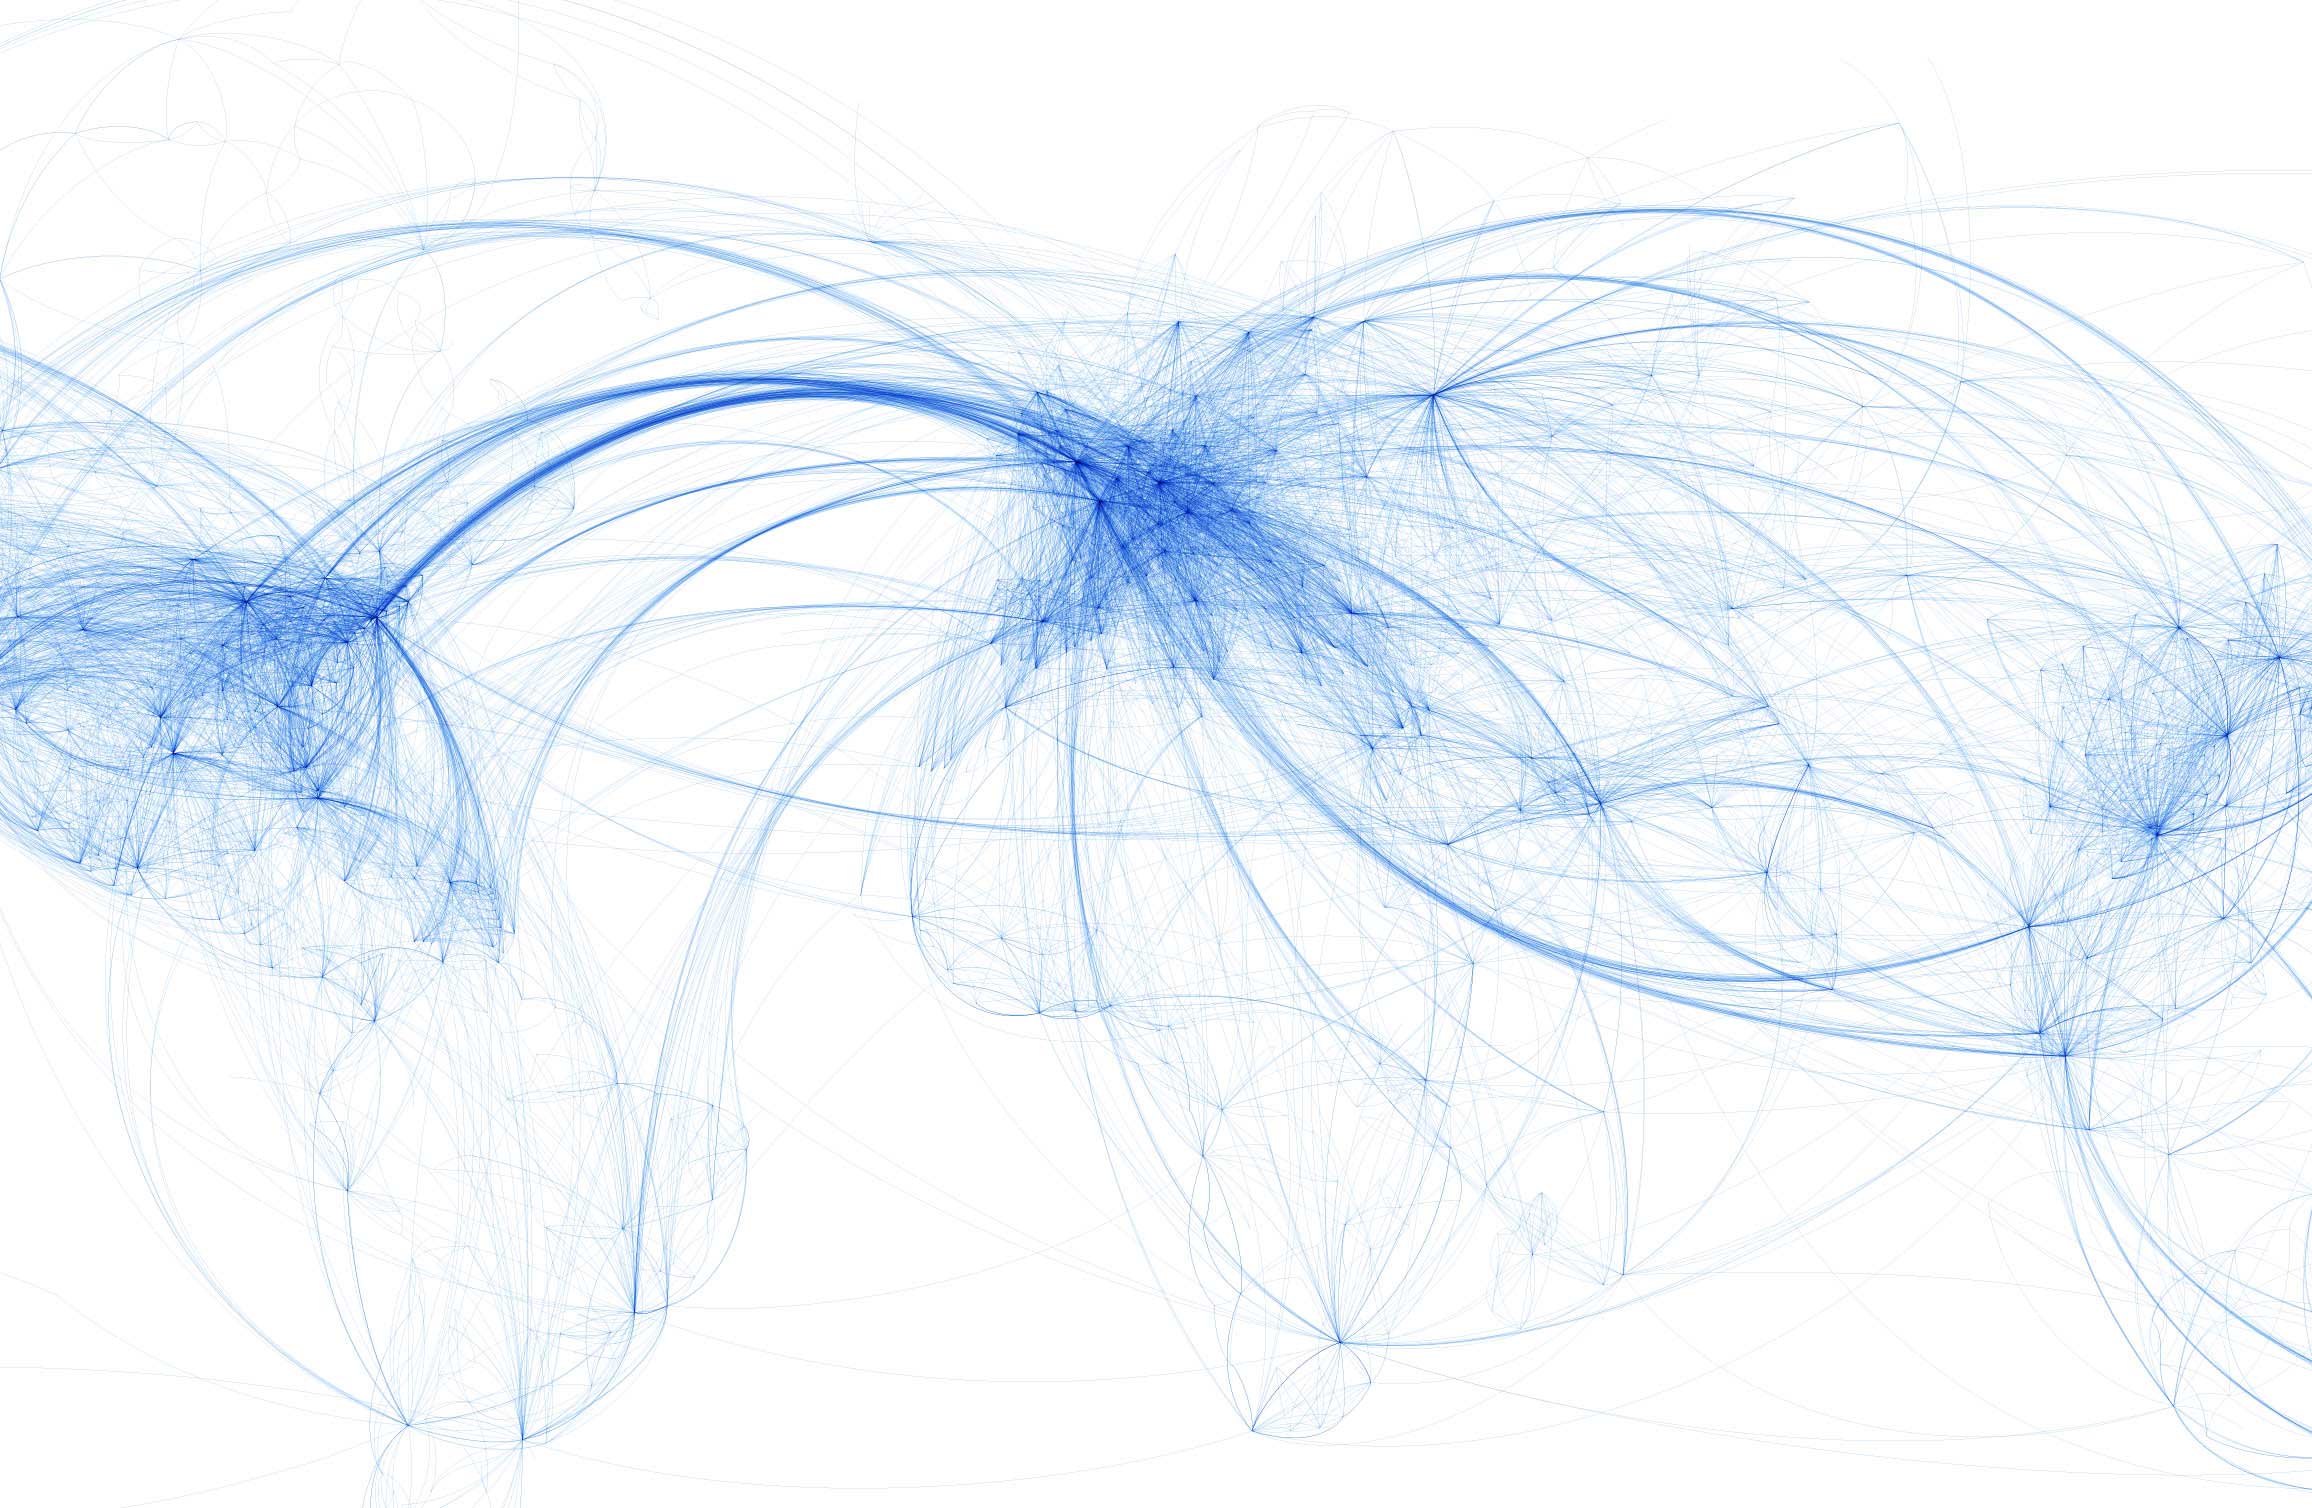 2016-02/1456175559_world-airline-routes.jpg